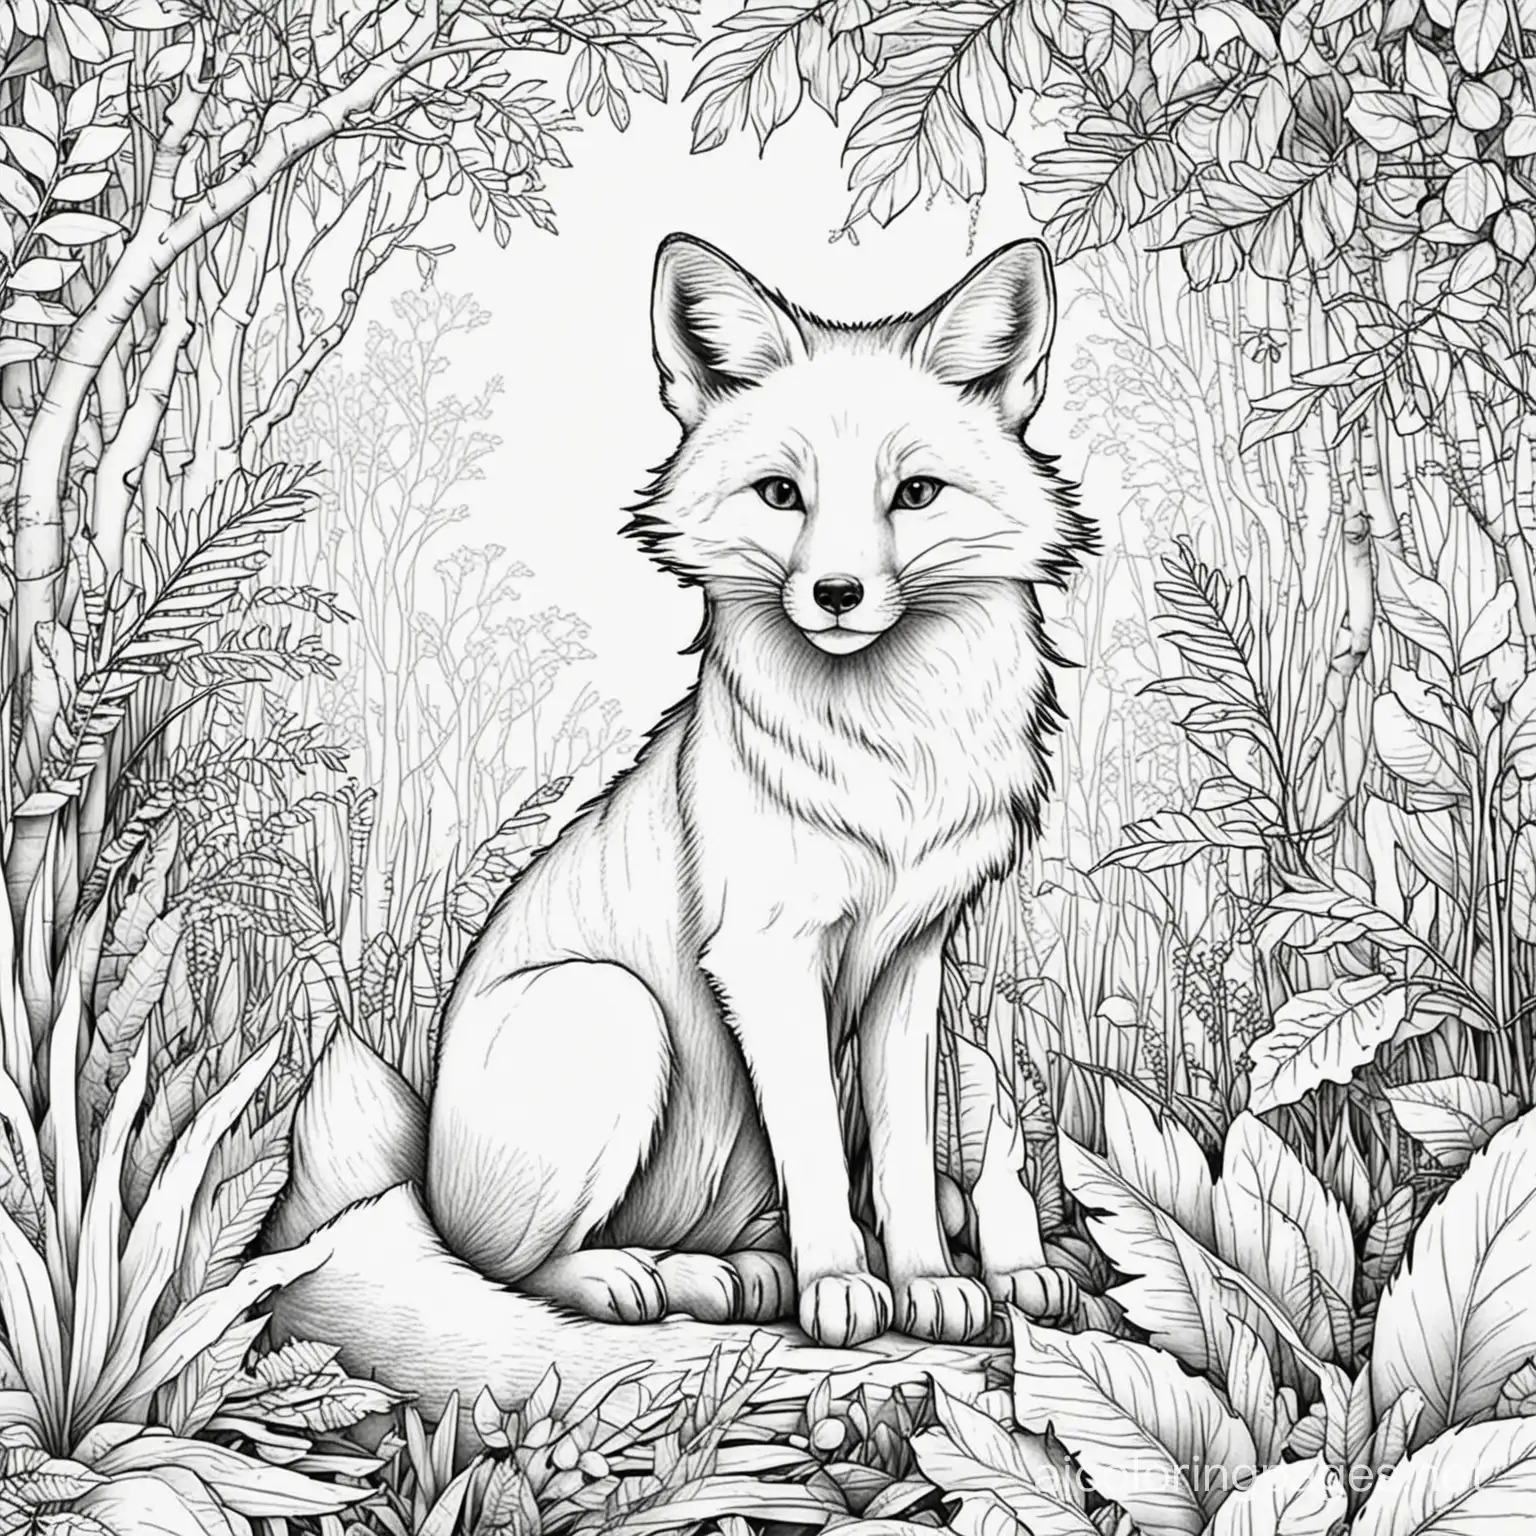 fox and cut fox in the jungle, Coloring Page, black and white, line art, white background, Simplicity, Ample White Space. The background of the coloring page is plain white to make it easy for young children to color within the lines. The outlines of all the subjects are easy to distinguish, making it simple for kids to color without too much difficulty